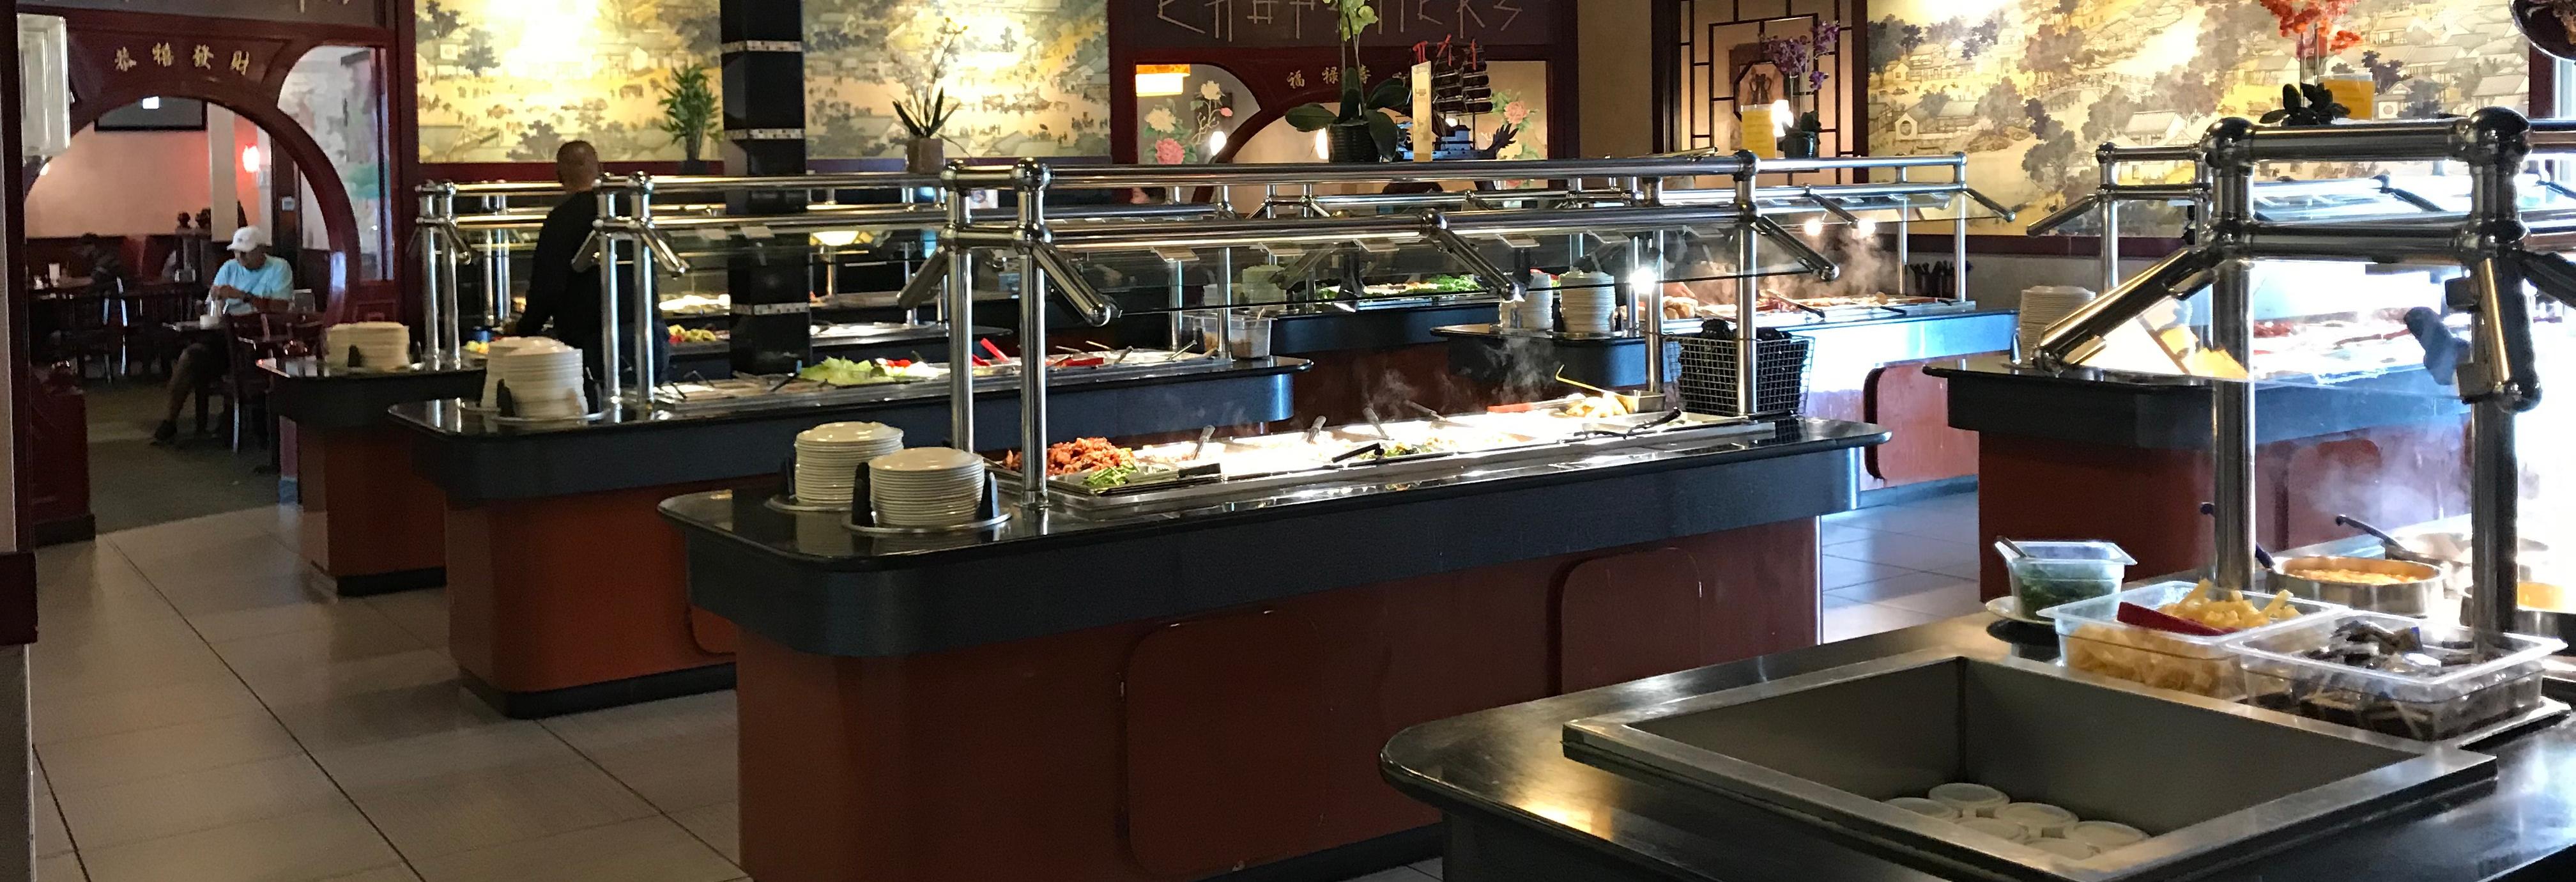 CHOPSTICKS SUPER BUFFET in Clearwater, FL - Local Coupons ...